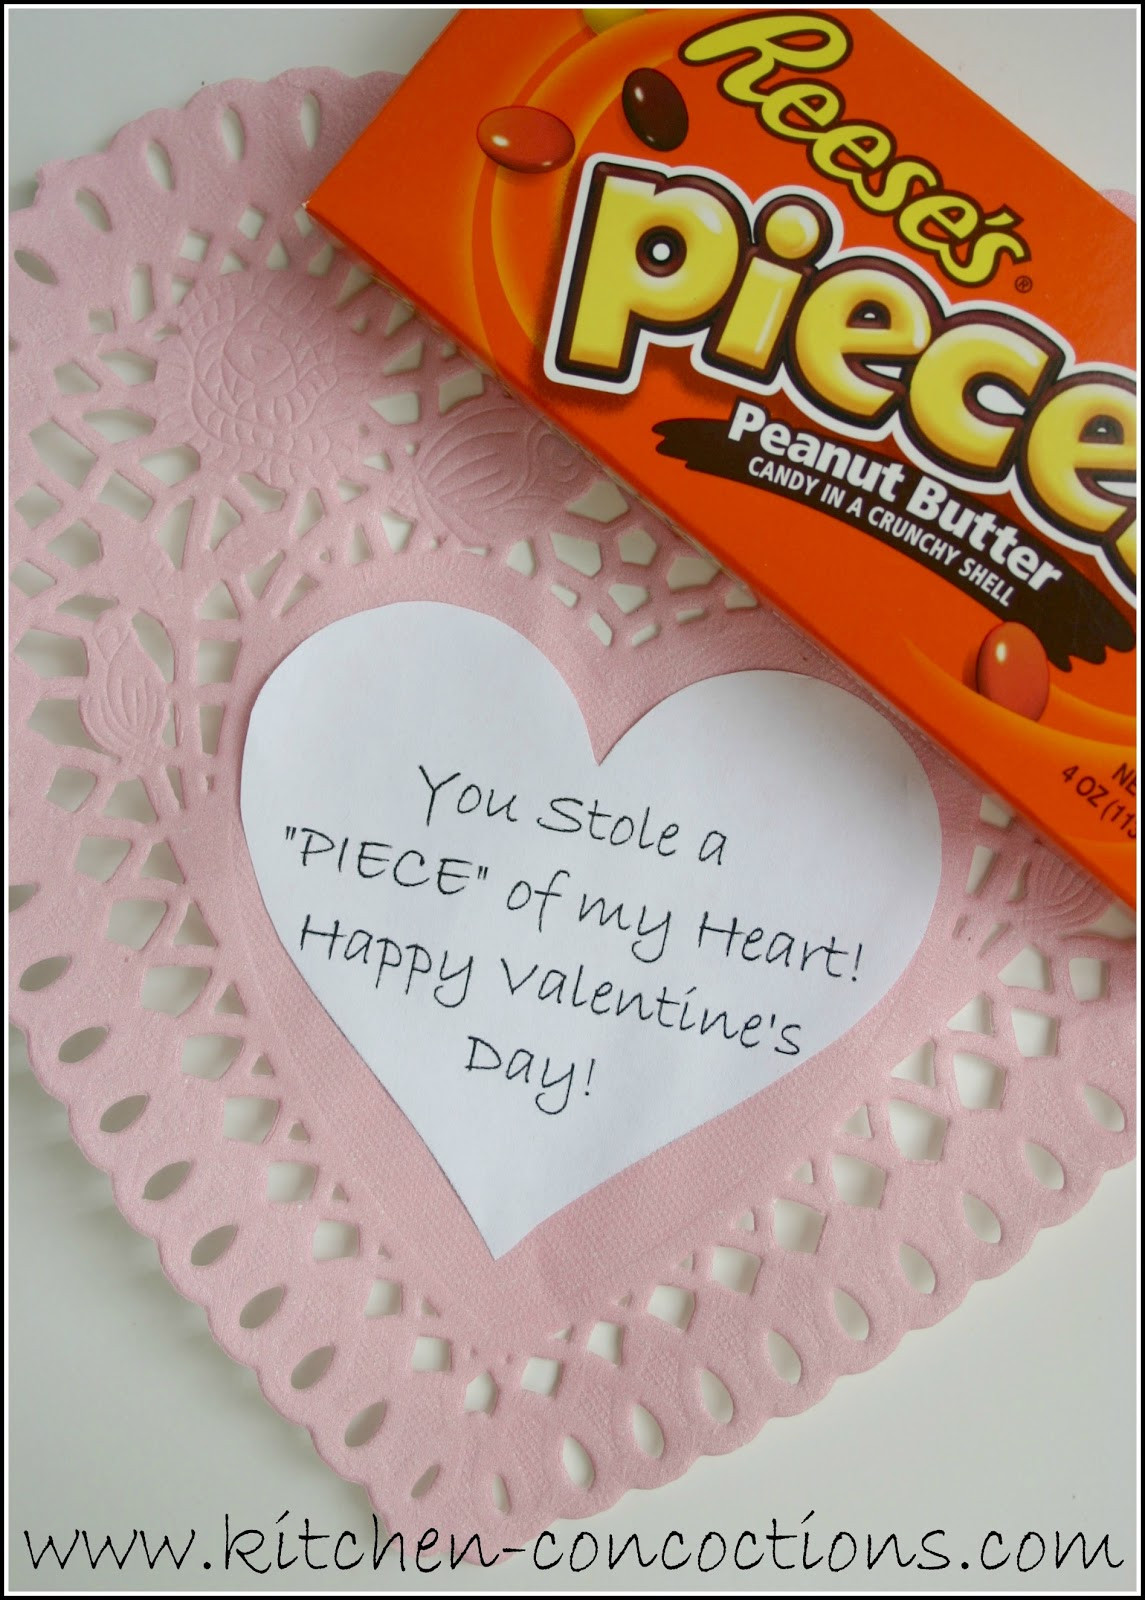 Valentines Day Card With Candy
 How To Valentine s Day Candy Cards Kitchen Concoctions